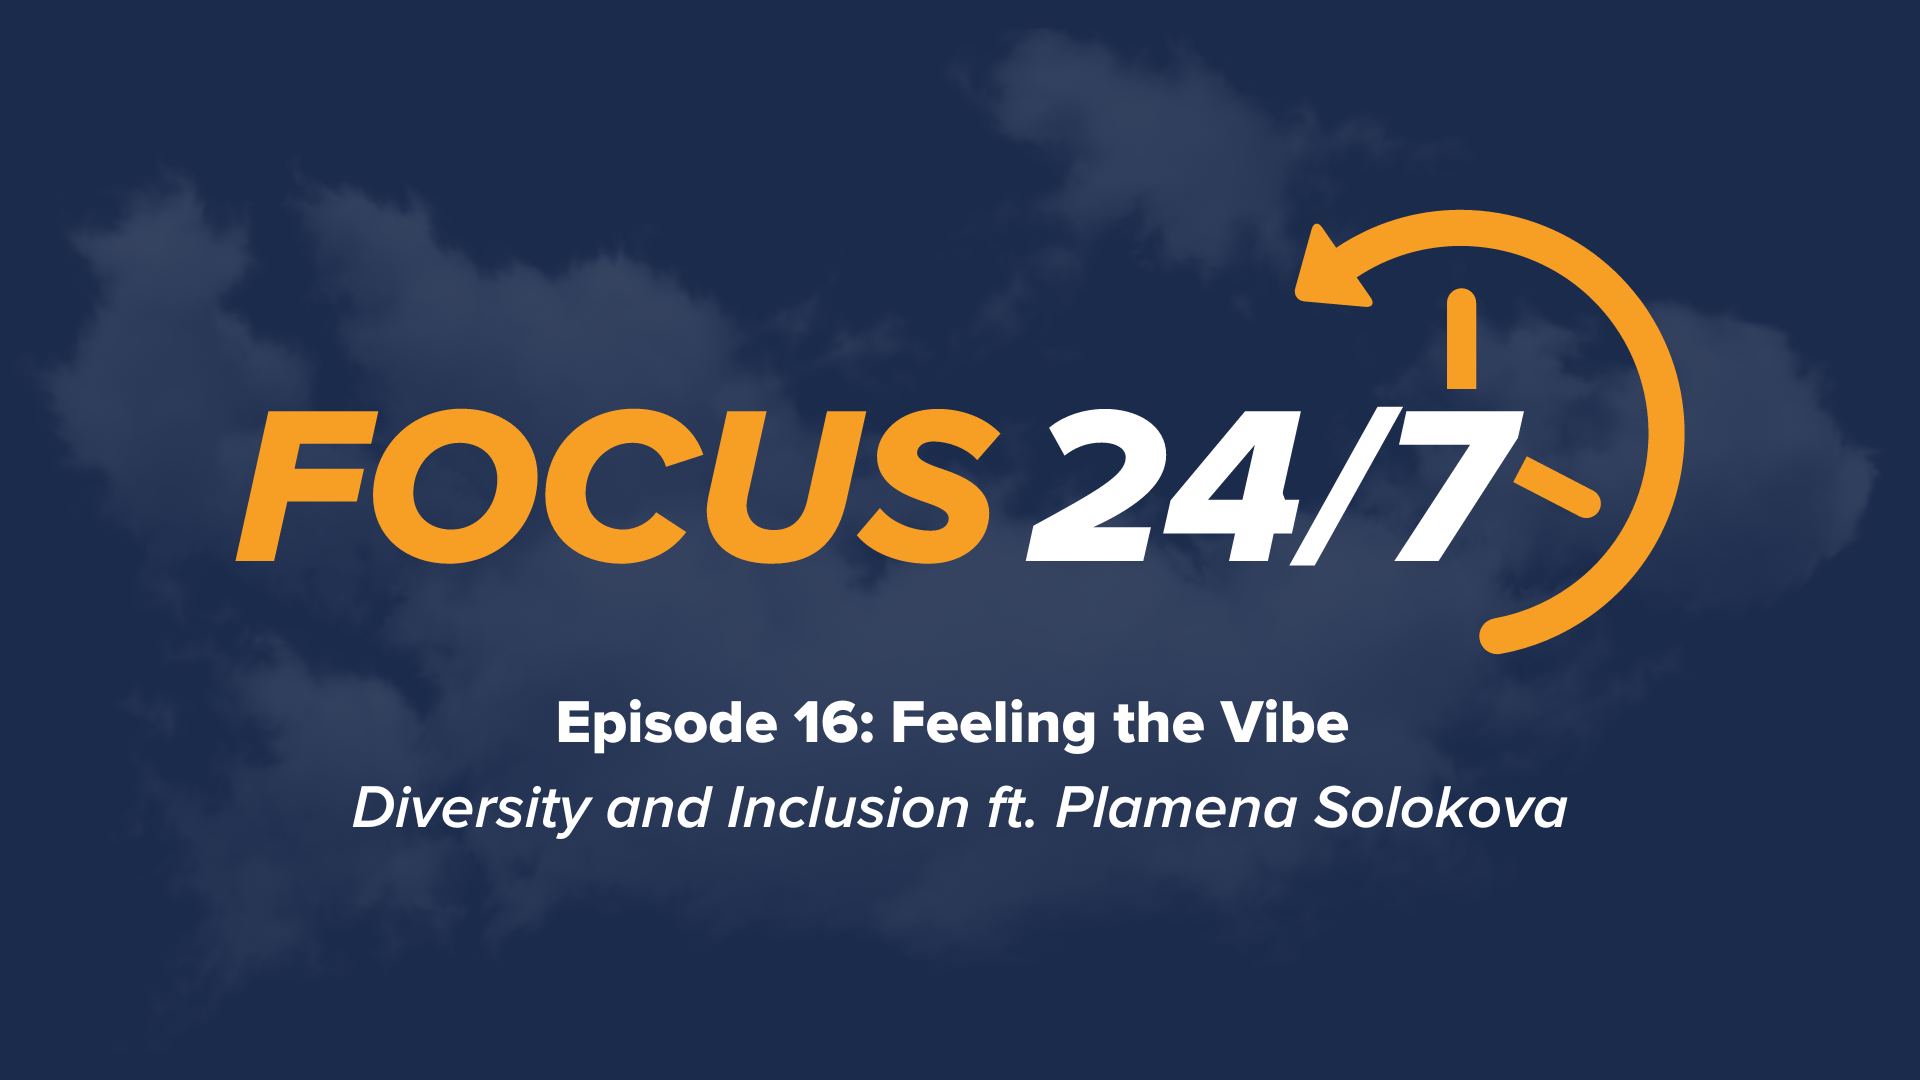 Focus 24/7 | Episode #16 | Feeling the Vibe - Diversity and Inclusion ft. Plamena Solokova